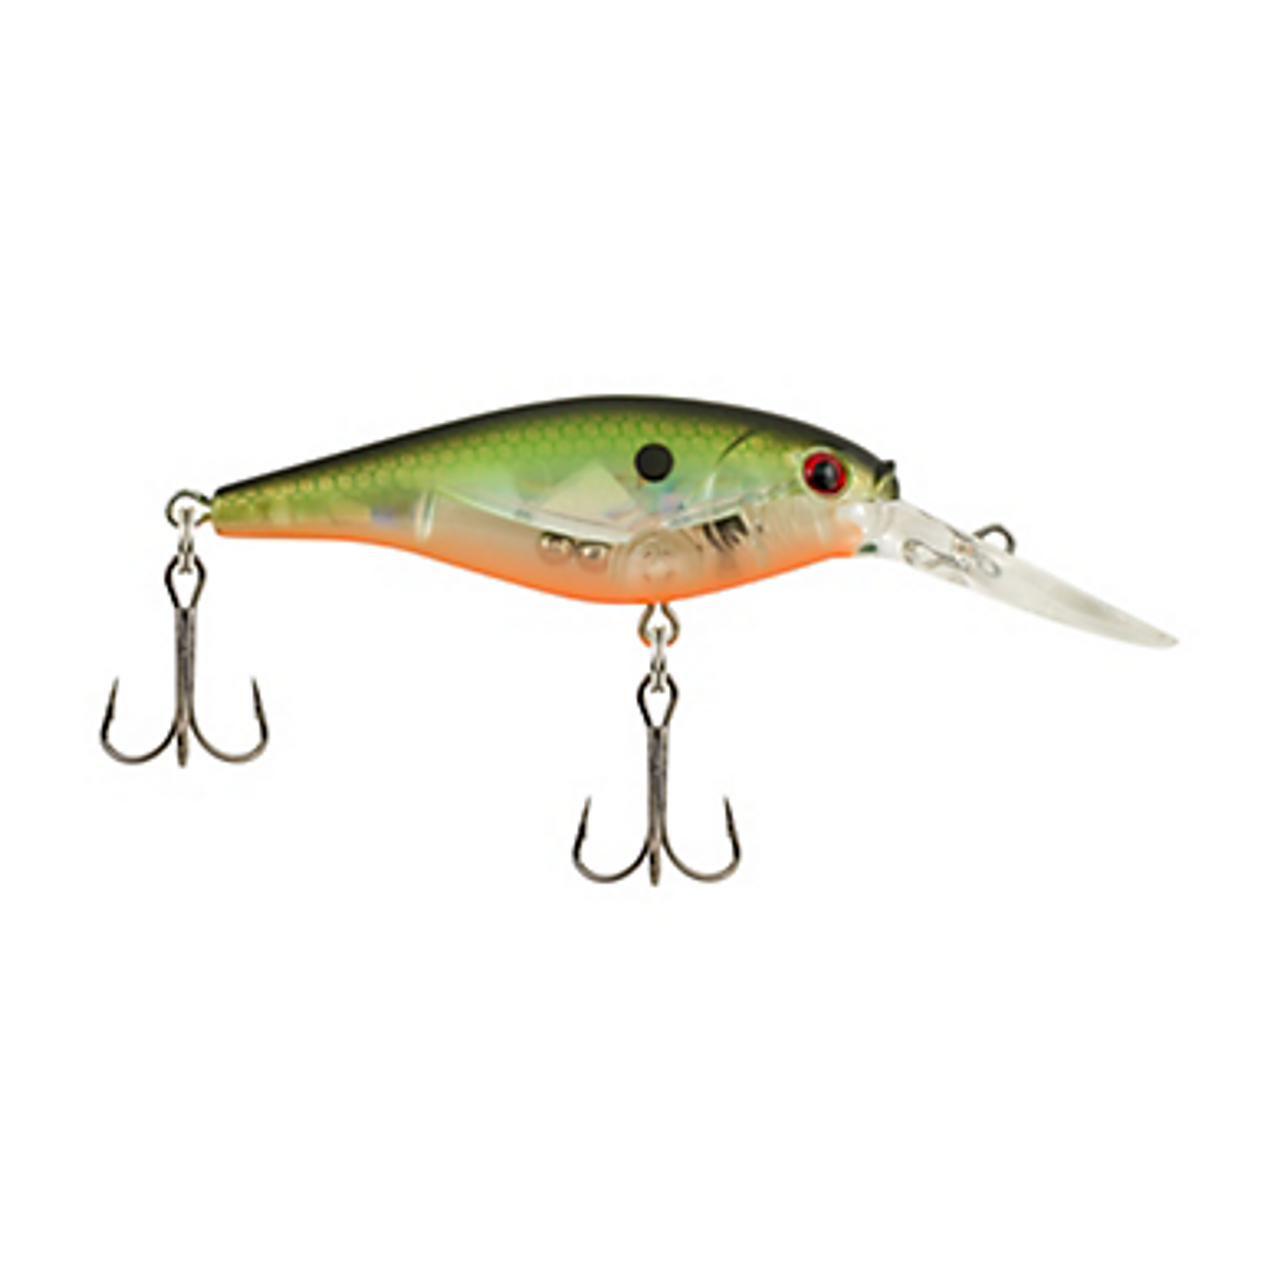 Berkley Flicker Shad 5 Dives 9'-11' Slow Rise FFSH5M Firetail Series CHOOSE  YOUR COLOR!